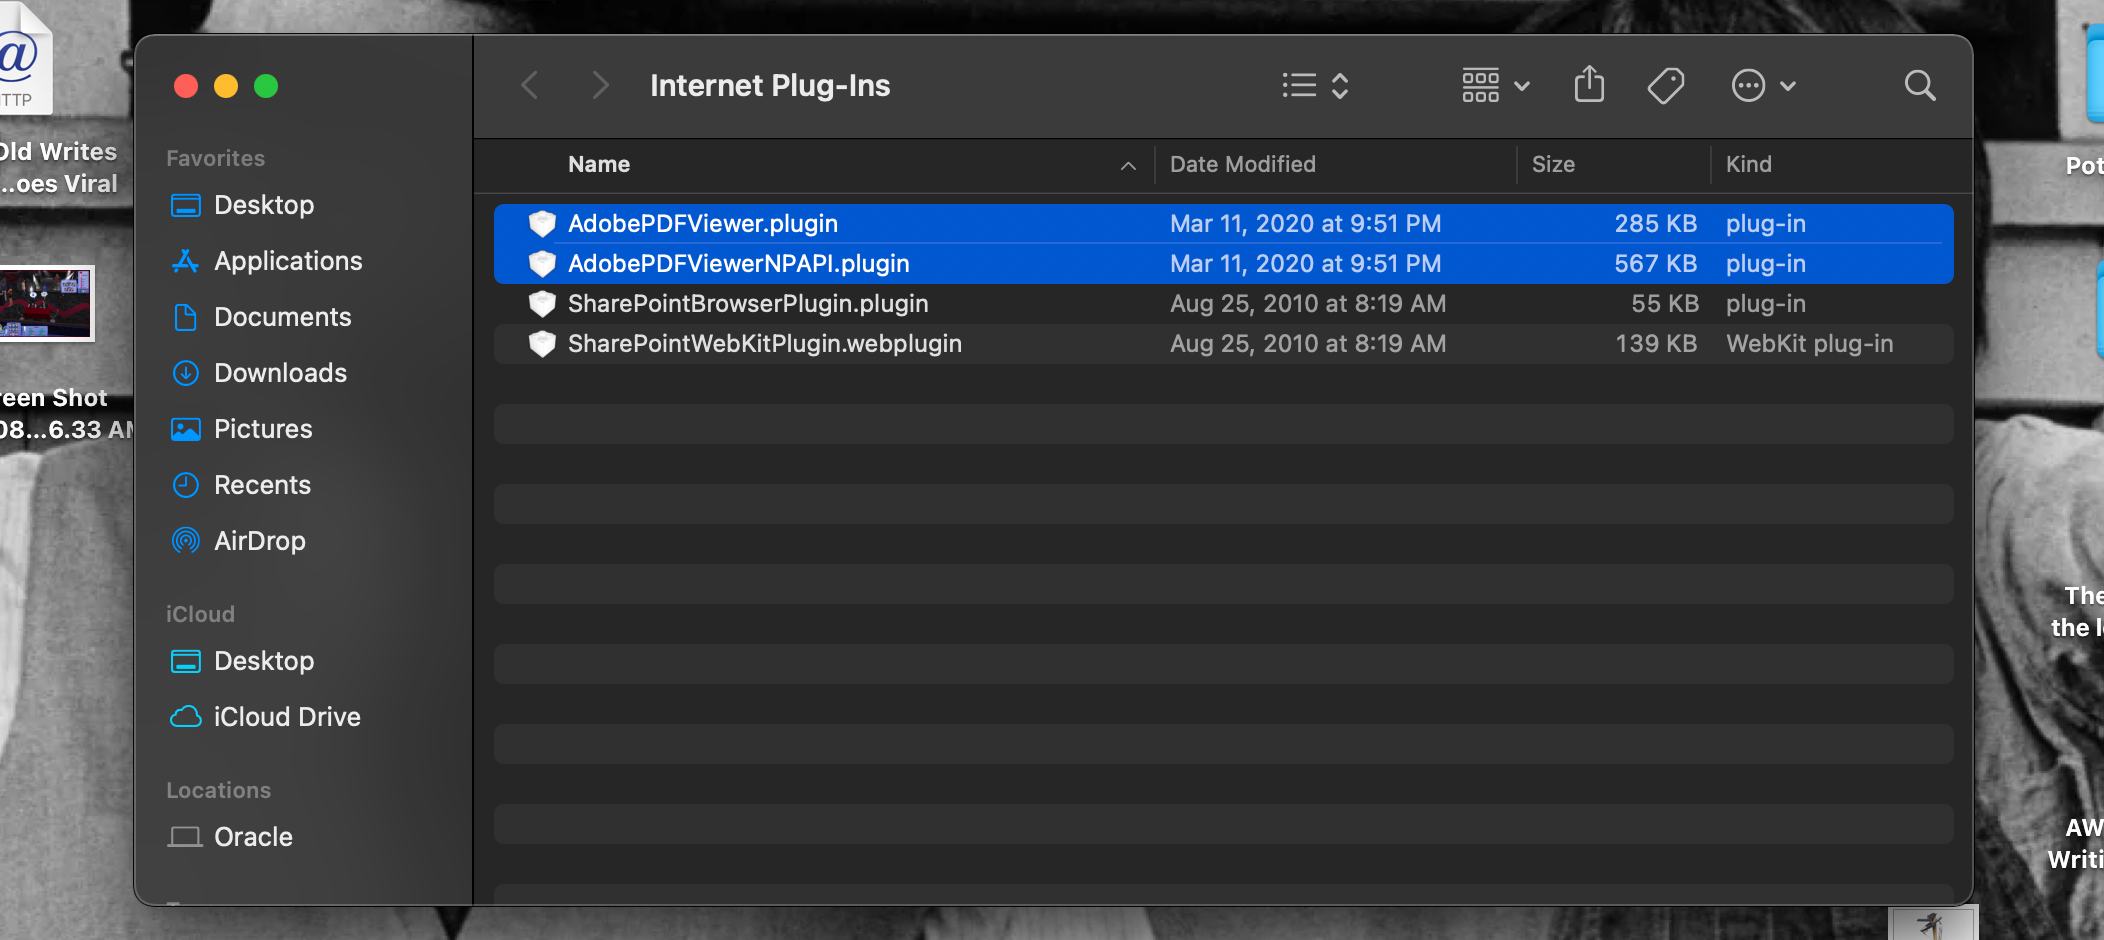 A Mac Library open to the Internet Plug-Ins folder. The Adobe plug-ins are highlighted